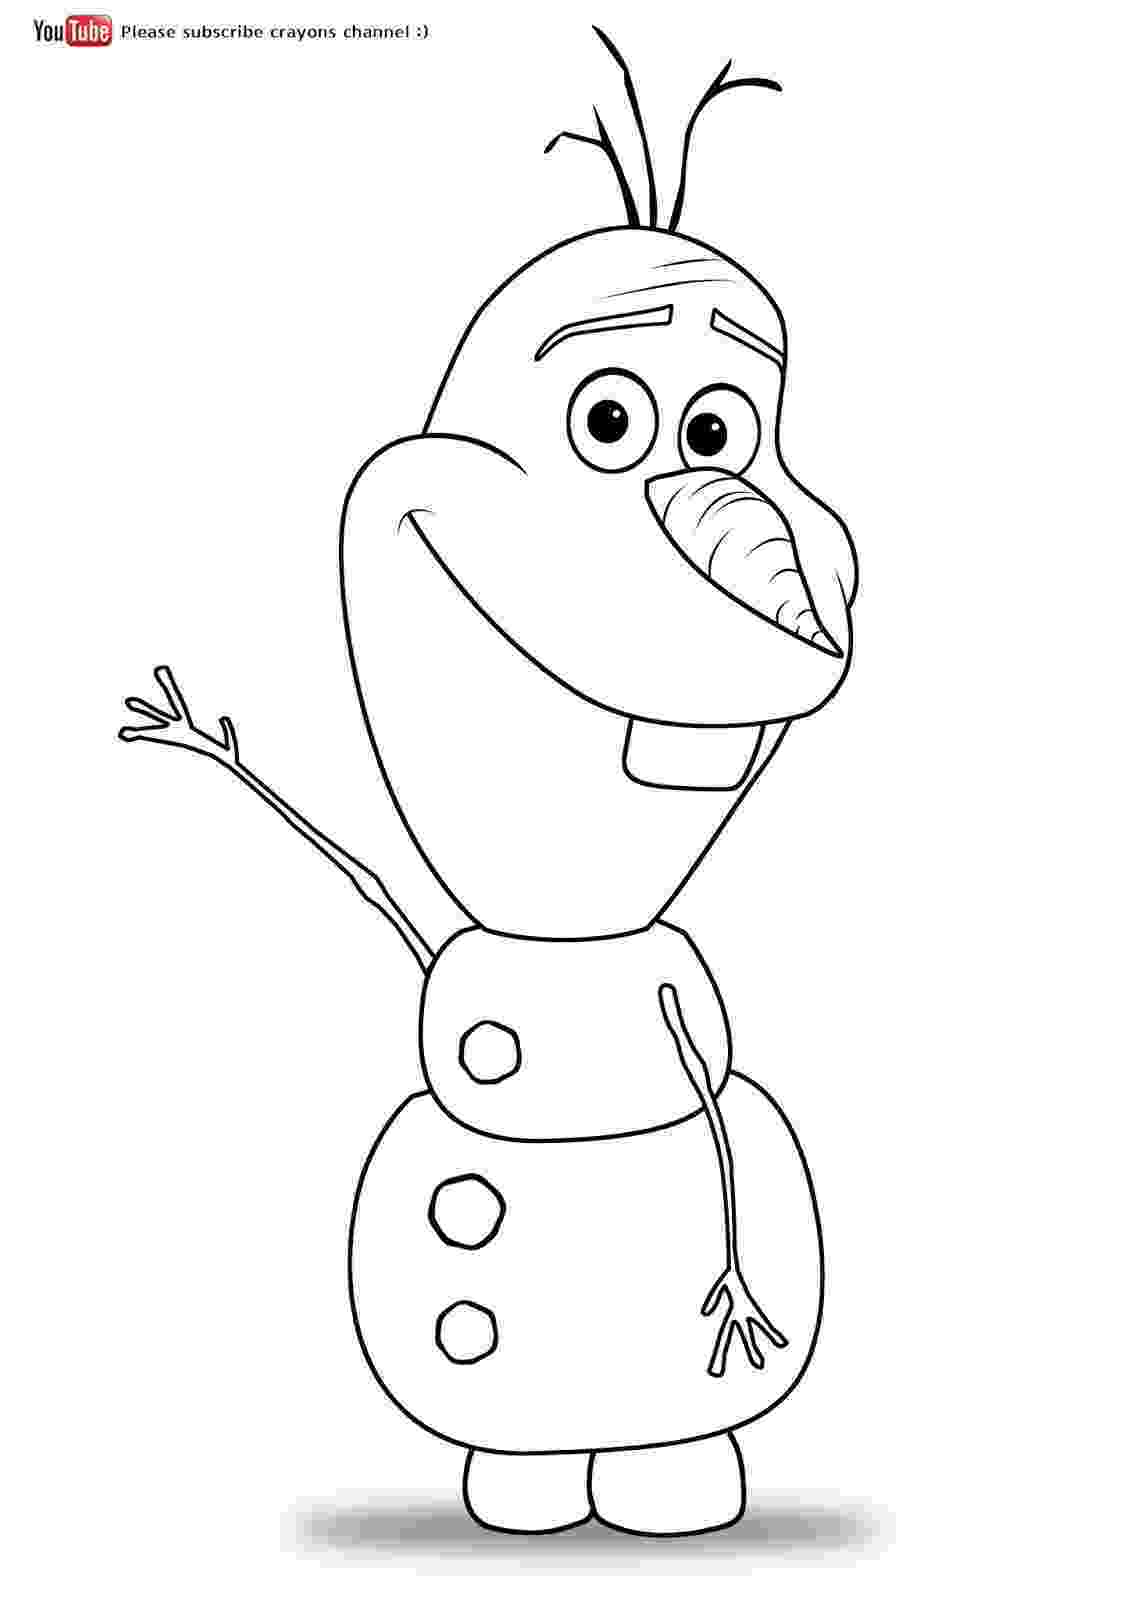 pictures of olaf from frozen olaf the snowman coloring pages crafts pinterest olaf from pictures of frozen 